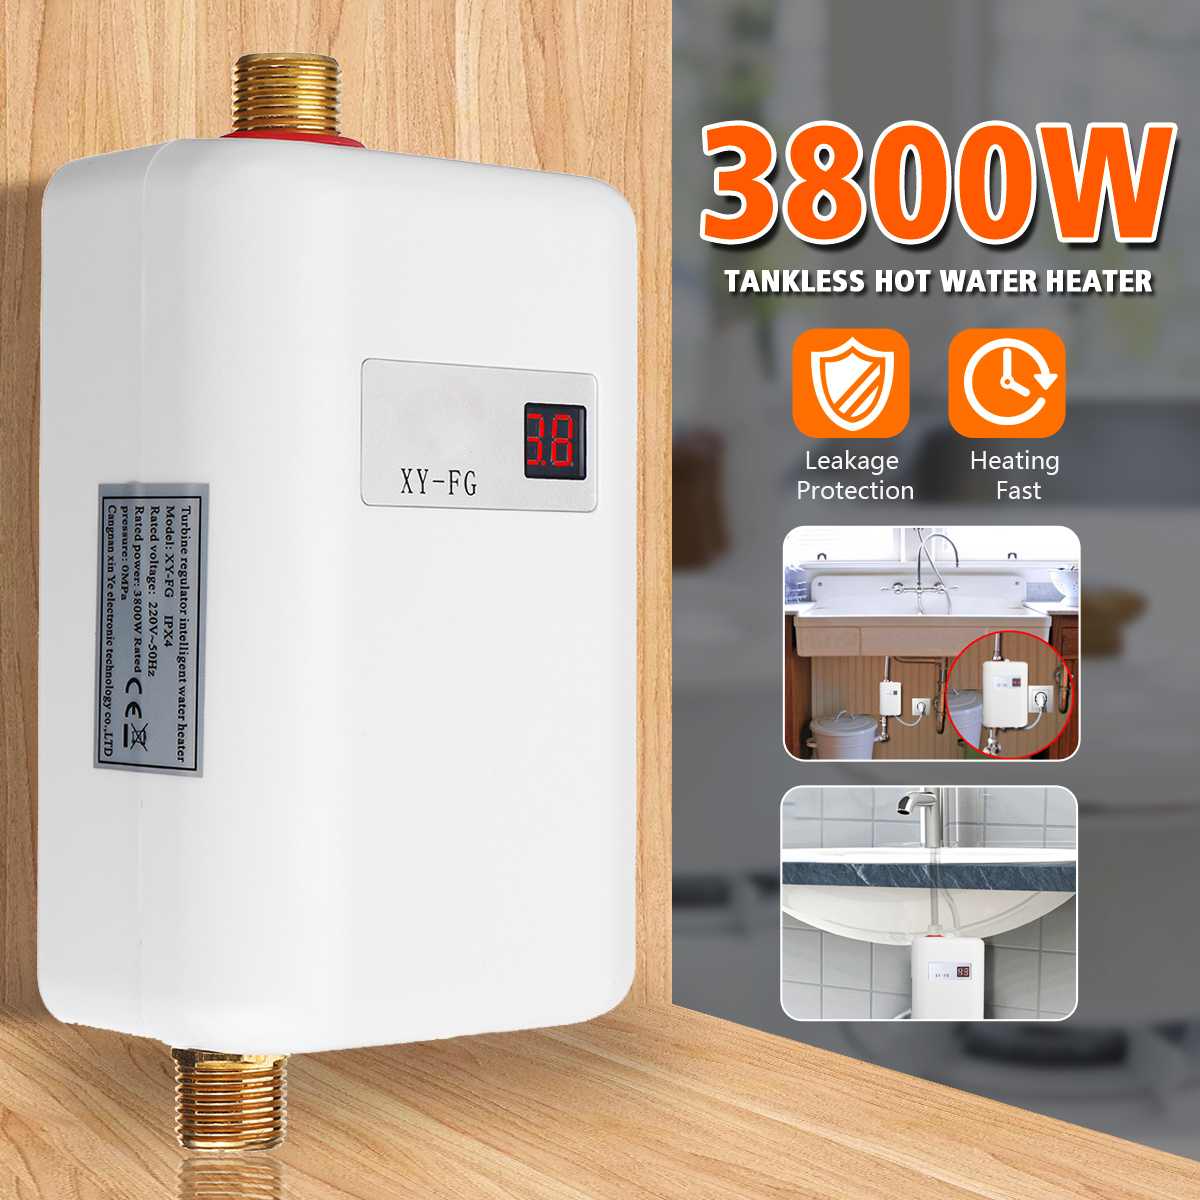 3800W/3400W Electric Water Heater Instant Tankless Water Heater 220V 3.8KW Temperature display Heating Shower Universal